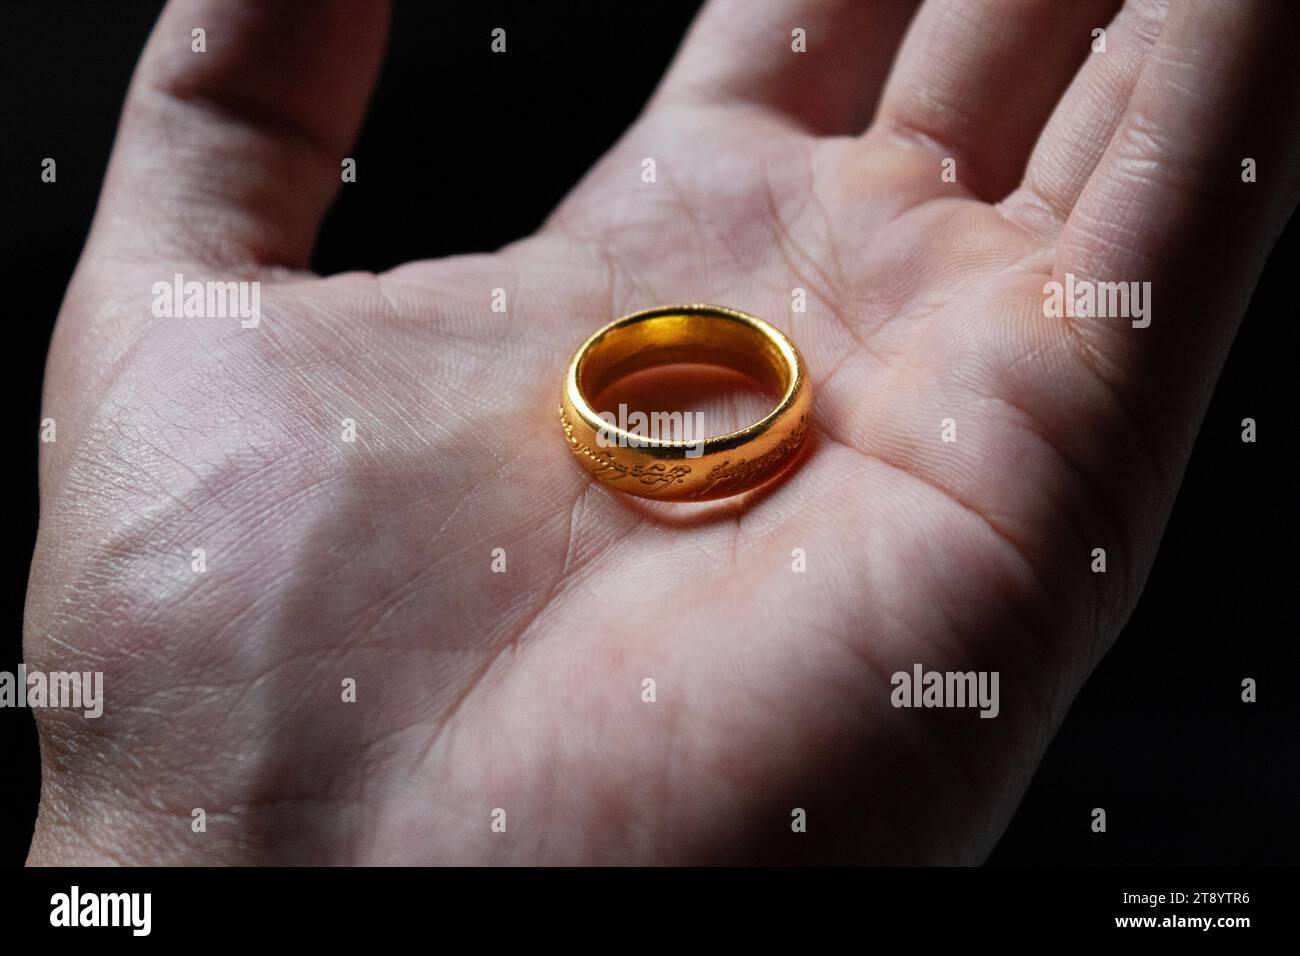 The one ring of the lord of the rings movie over a male hand and dark background Stock Photo